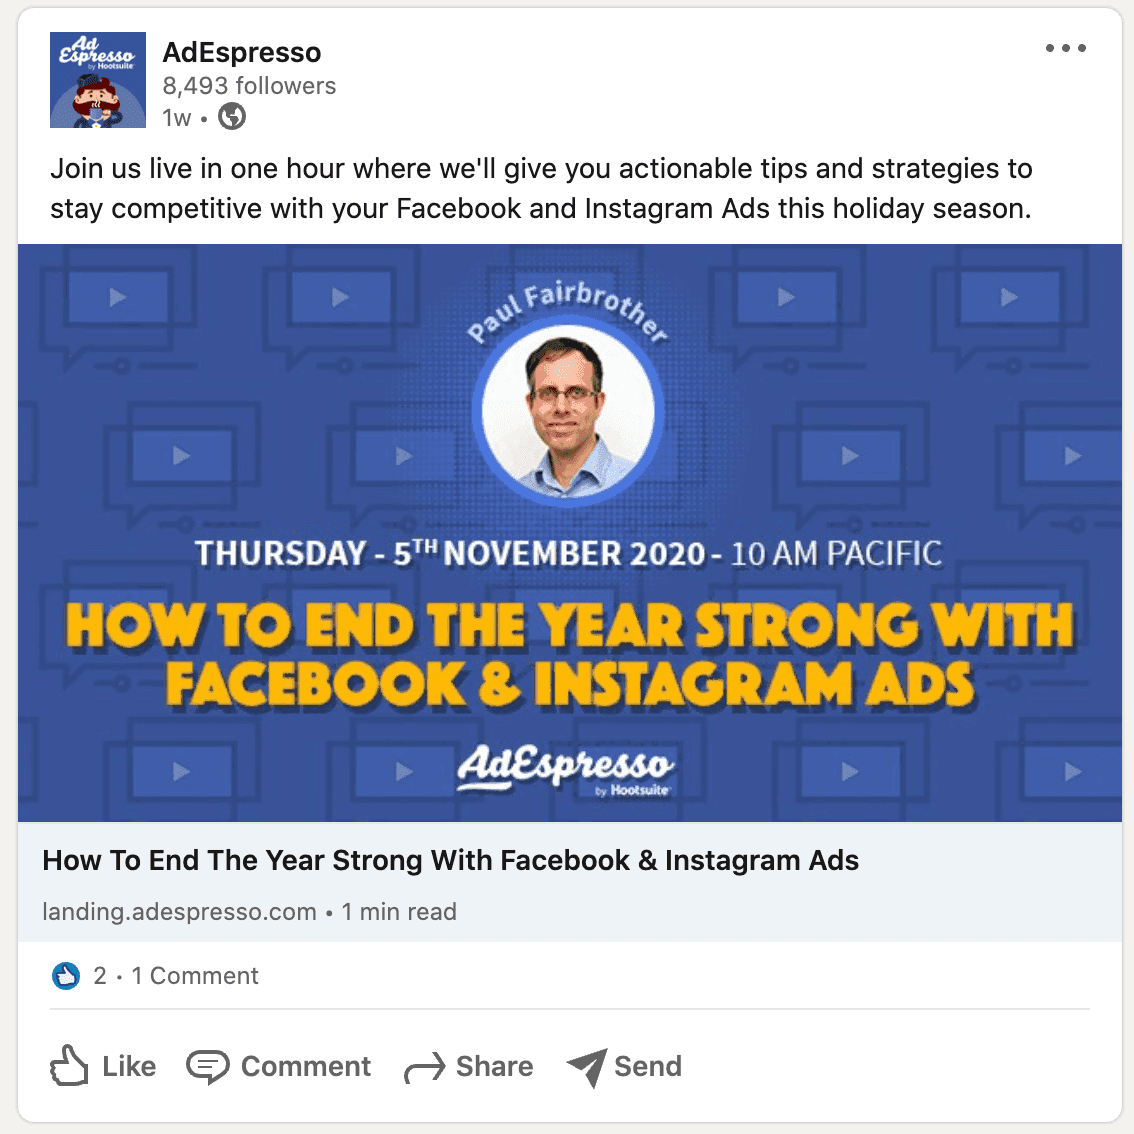 Example of a social media campaign post